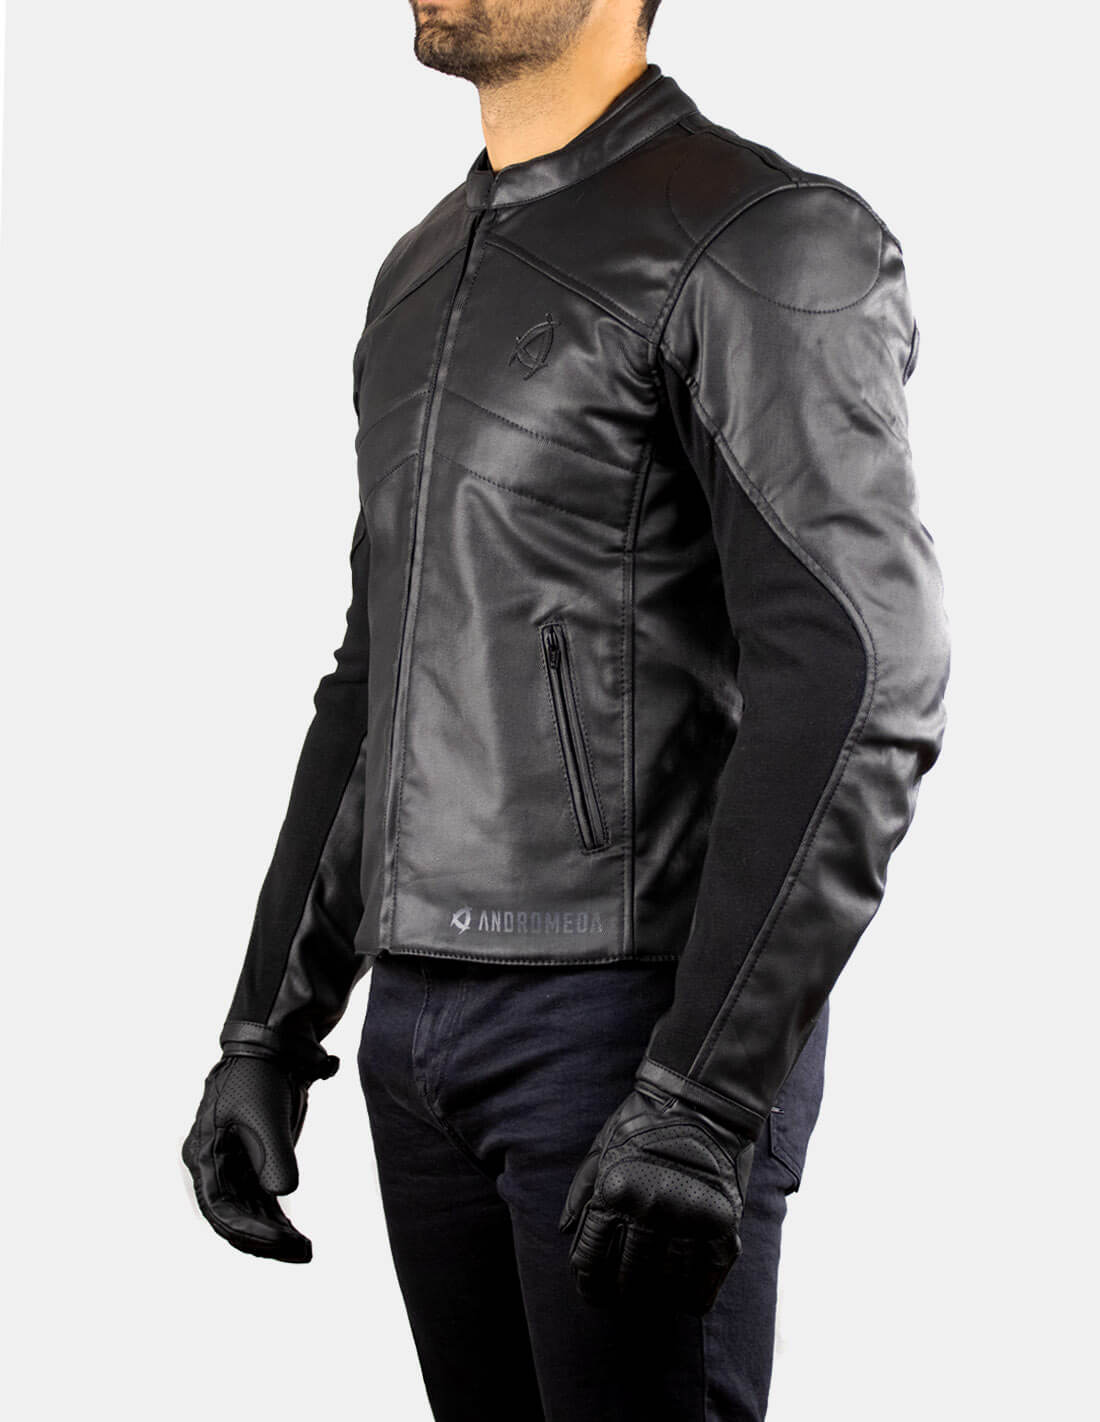 Neowise 2 | Non-leather motorcycle jacket. Cafe racer with armor